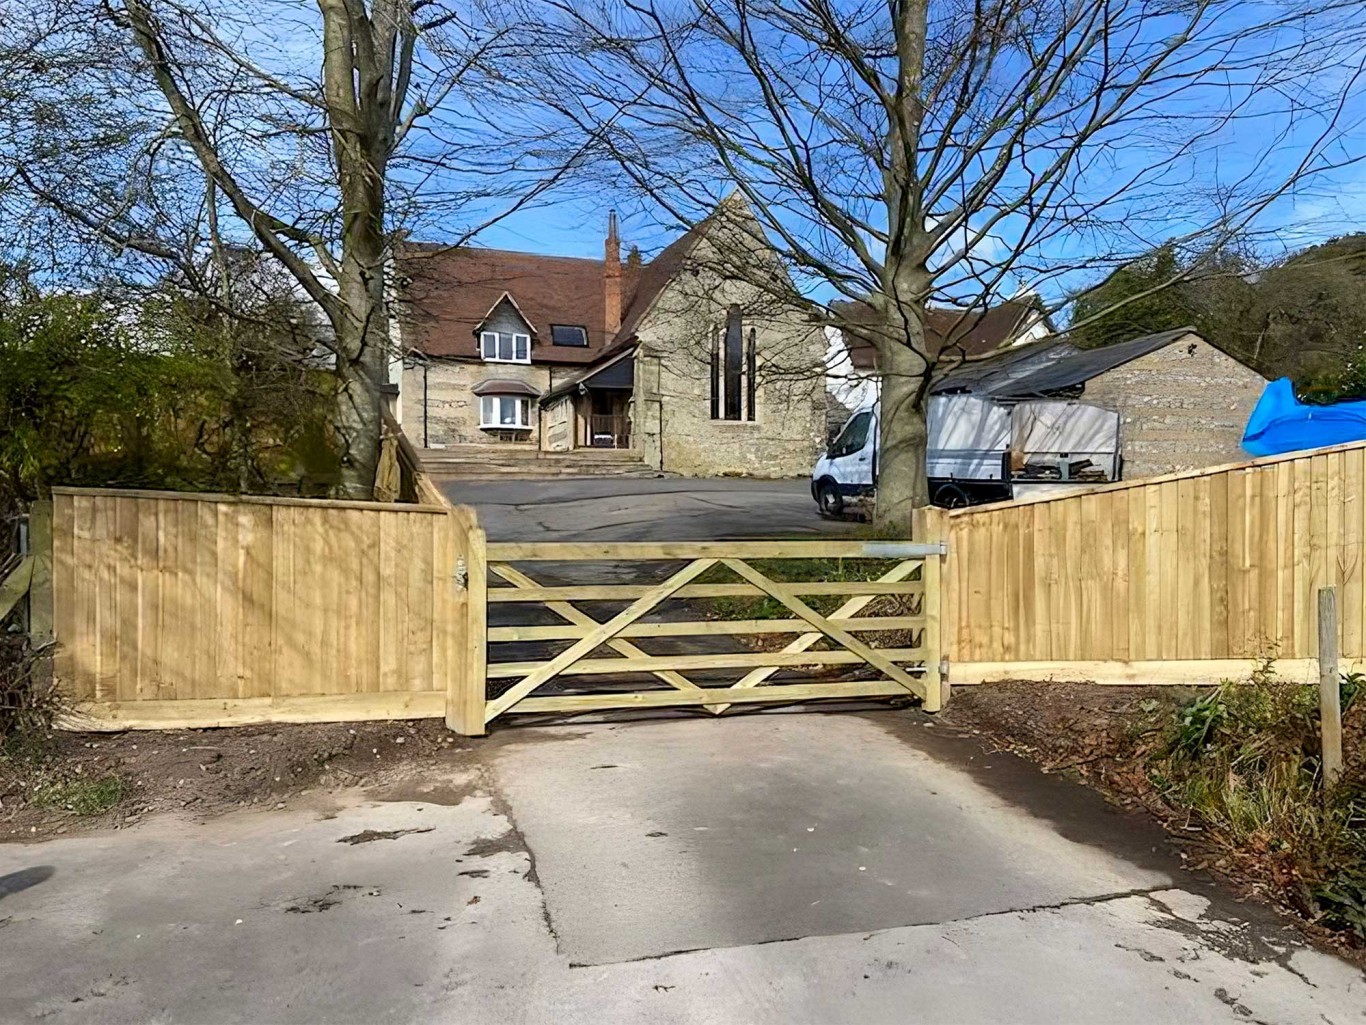 Five bar gate at the end of a driveway with closeboard fencing either side.